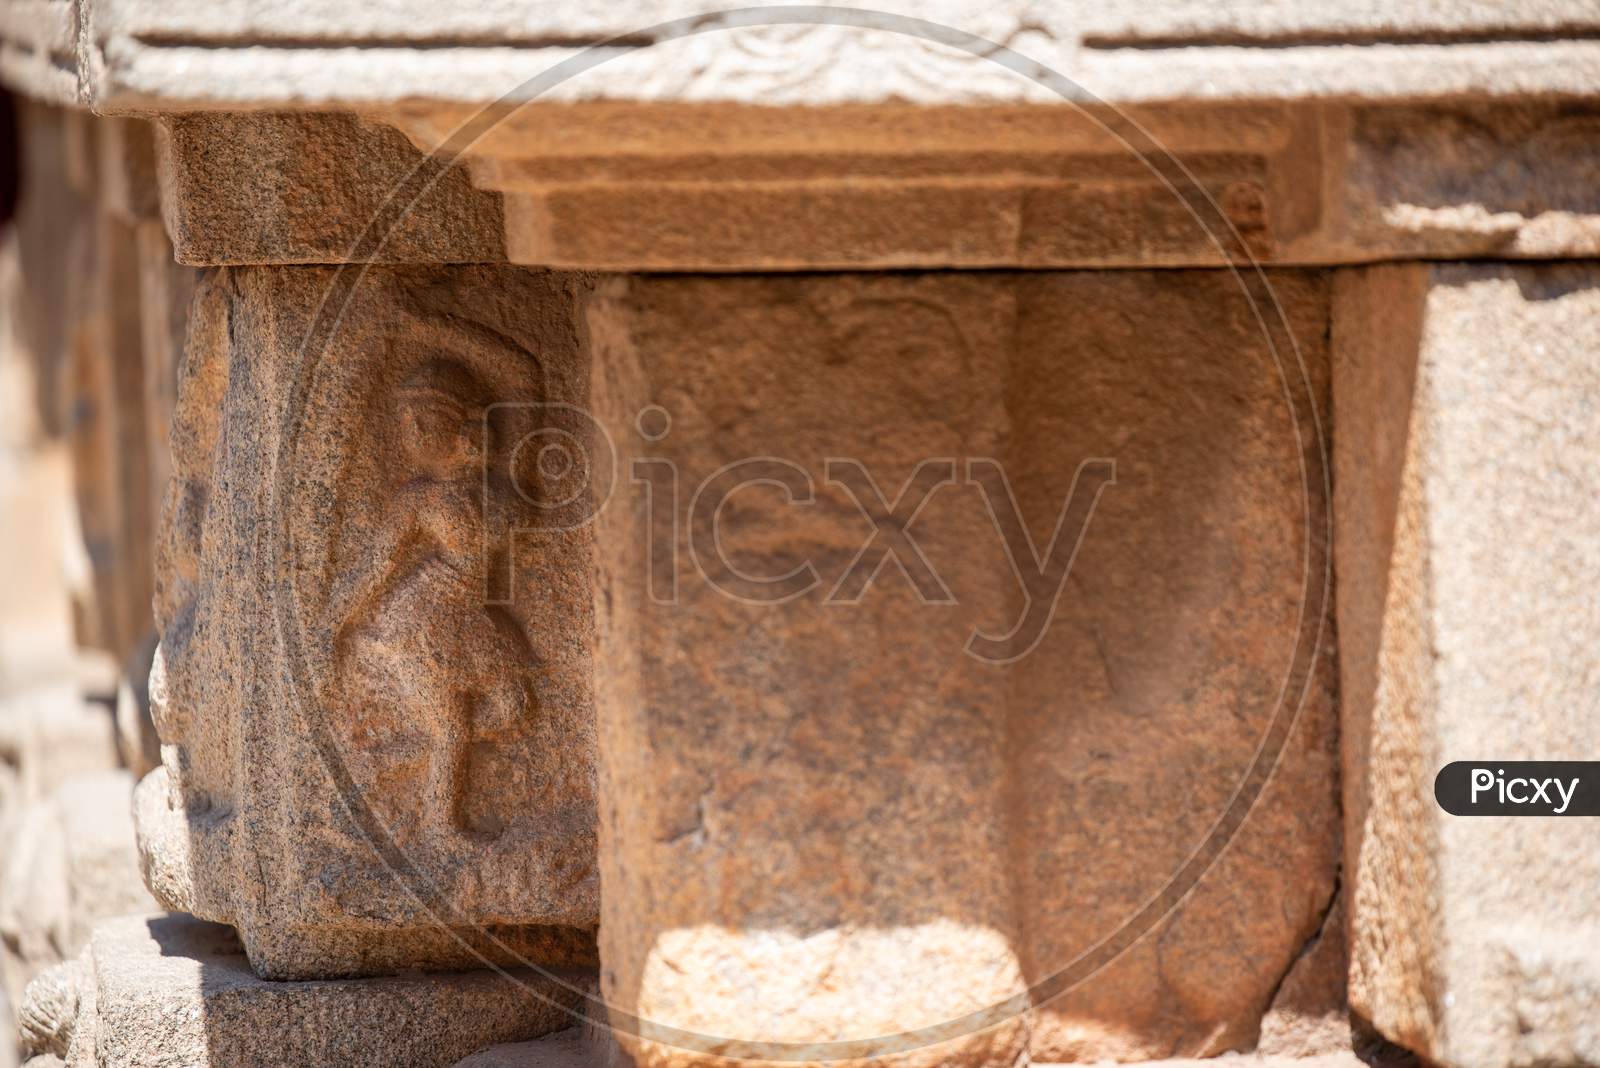 Historic Stone Carvings in a Hindu Temple in Hampi